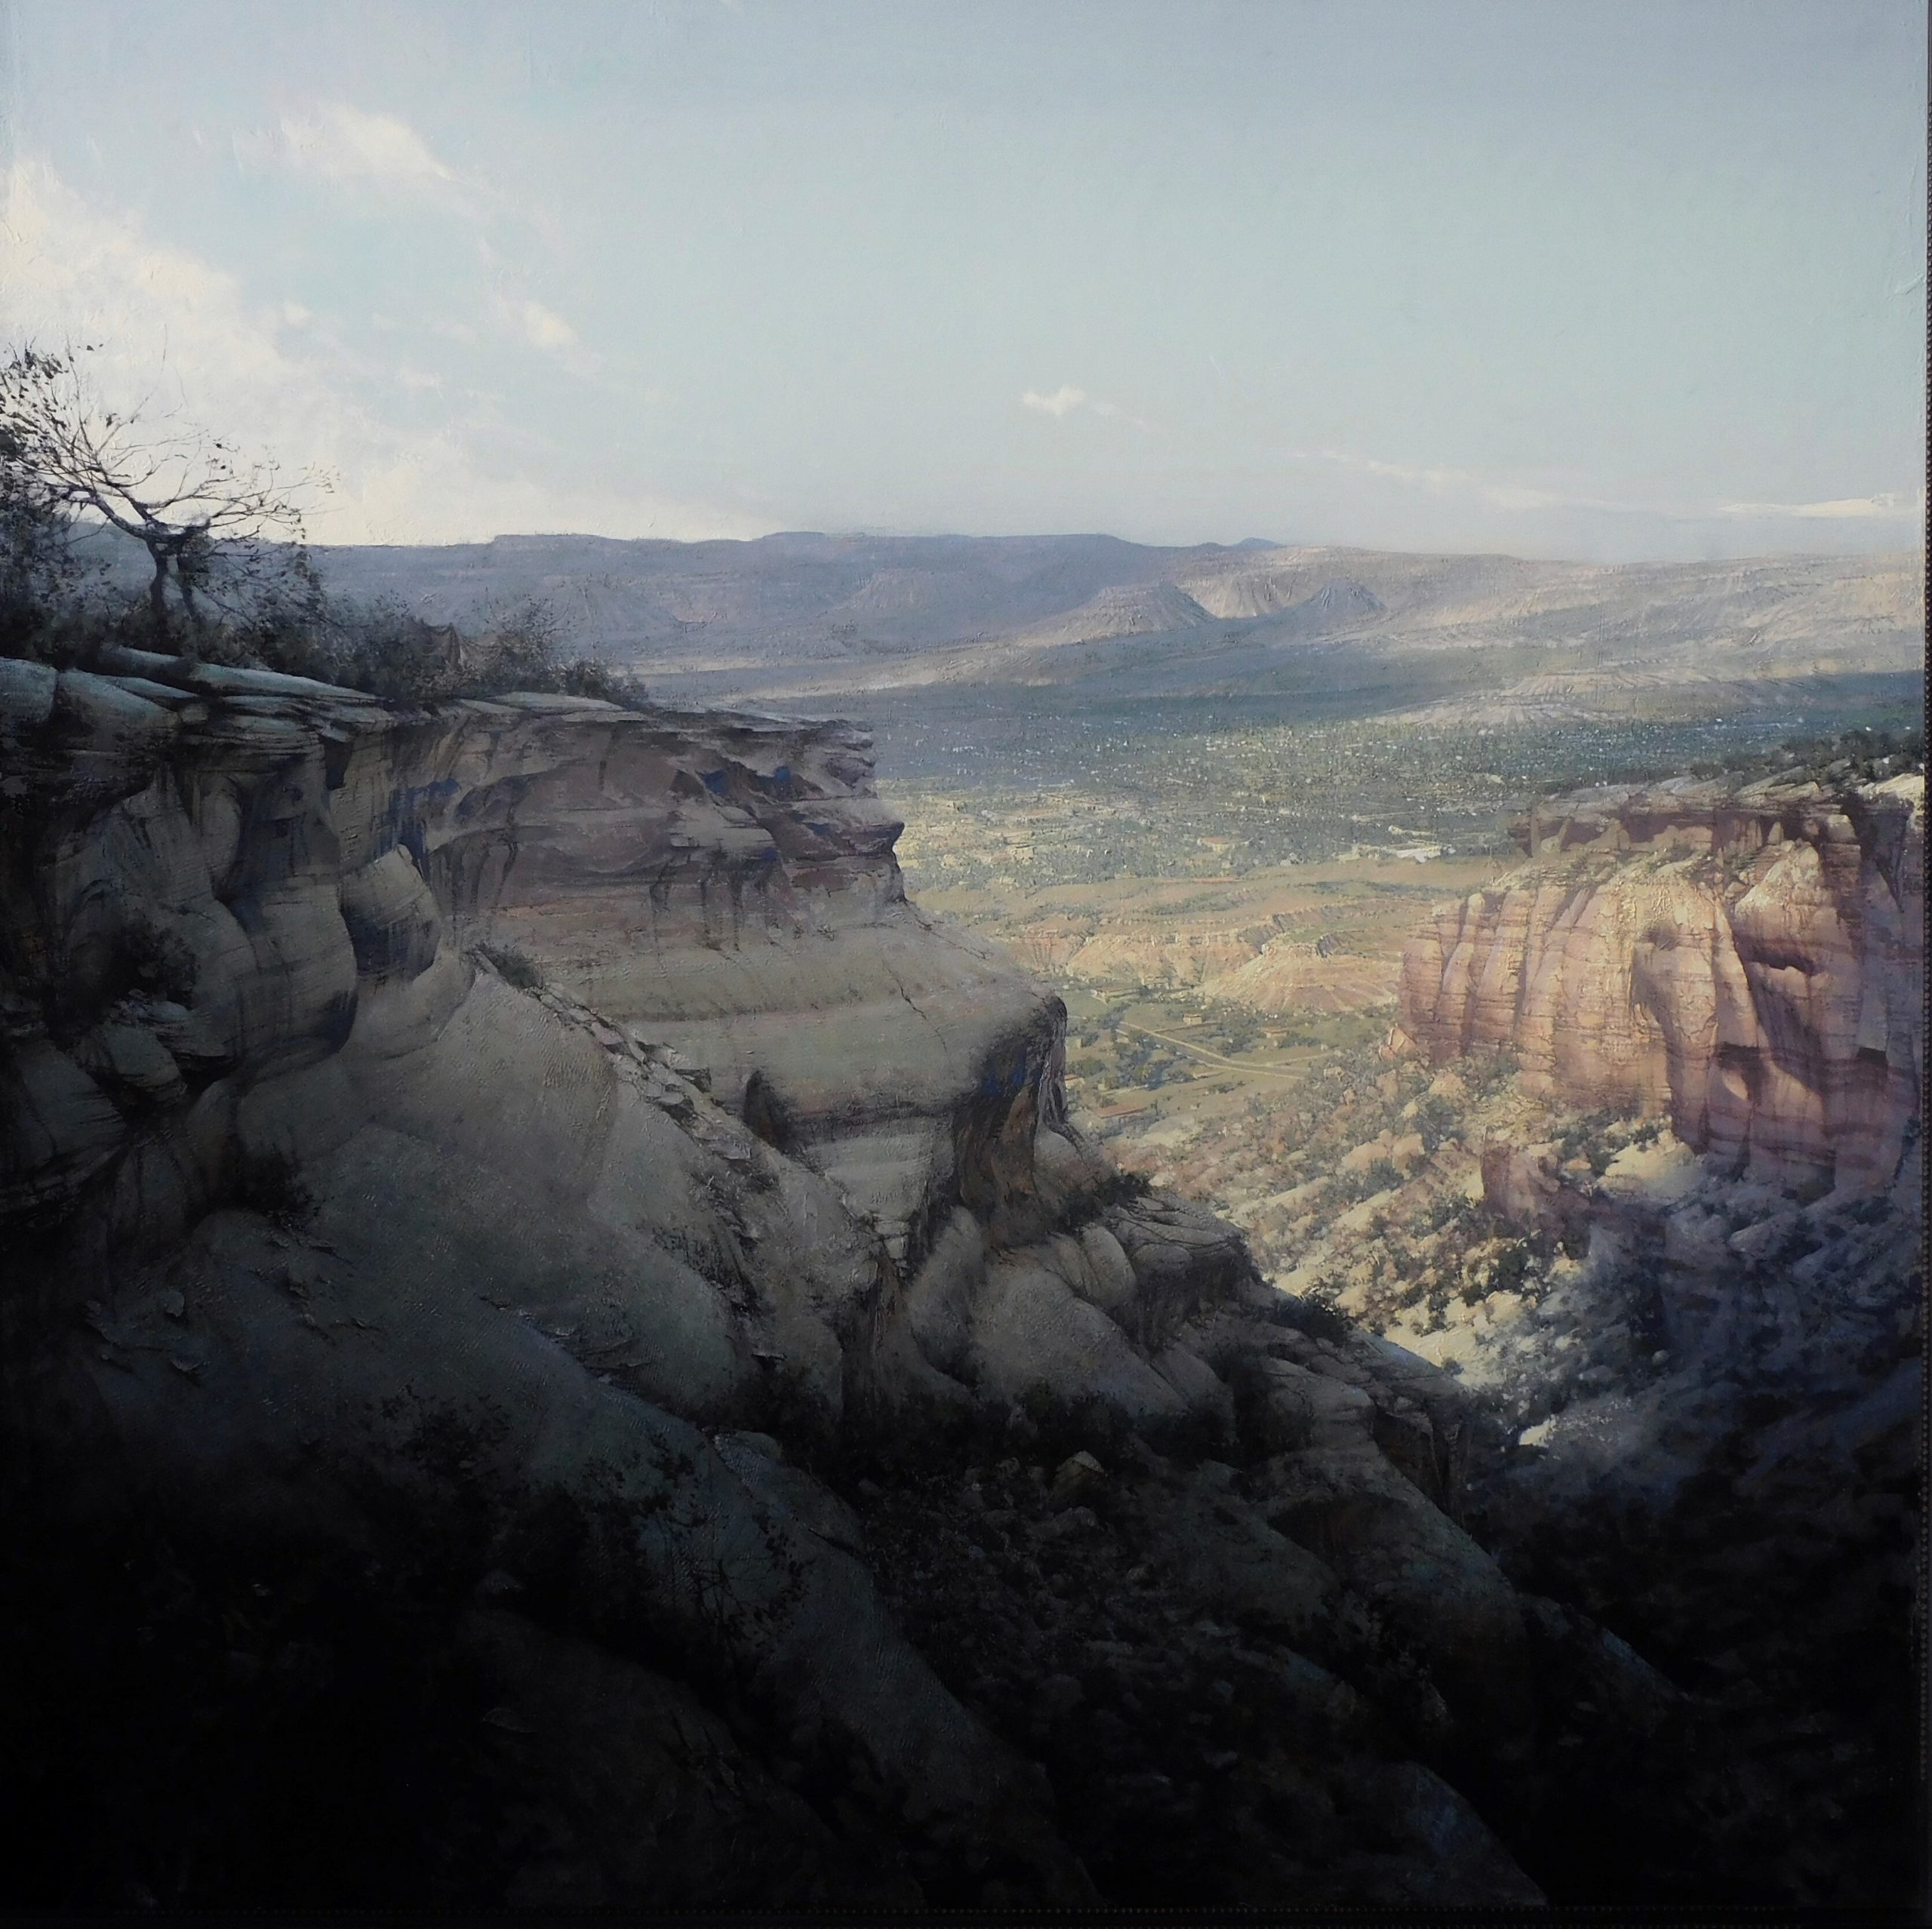 

											</b>

											<em>
												Lure of the West: Celebrating 50 Years of Gerald Peters Gallery  </em> 

											<h4>
												New York: April 29 - May 27, 2022      Santa Fe: June 24 - July 23, 2022											</h4>

		                																																													<i>Daniel Sprick, Western Landscape,</i>  
																																								2018-2021, 
																																								oil on board, 
																																								60 x 60 inches 
																								
		                				